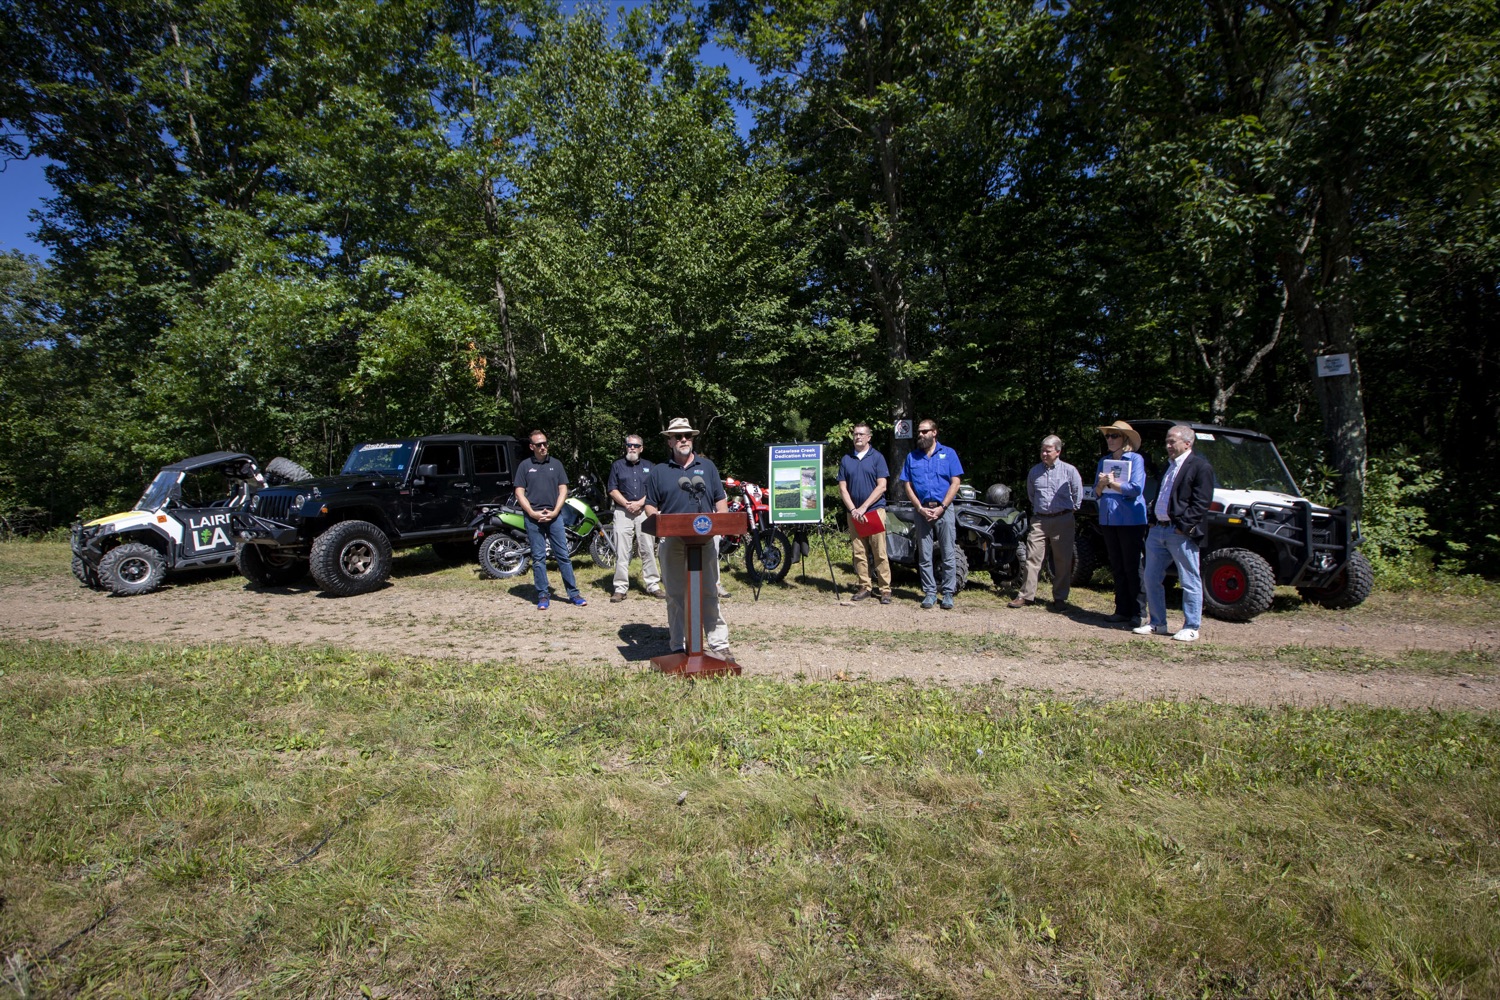 Weiser District Forester Tim Ladner discusses the acquisition of a 5,600-acre tract of land that will be developed into a new motorized recreation area, in McAdoo, PA on August 12, 2022.<br><a href="https://filesource.amperwave.net/commonwealthofpa/photo/22090_dcnr_RecreationArea_08.jpg" target="_blank">⇣ Download Photo</a>